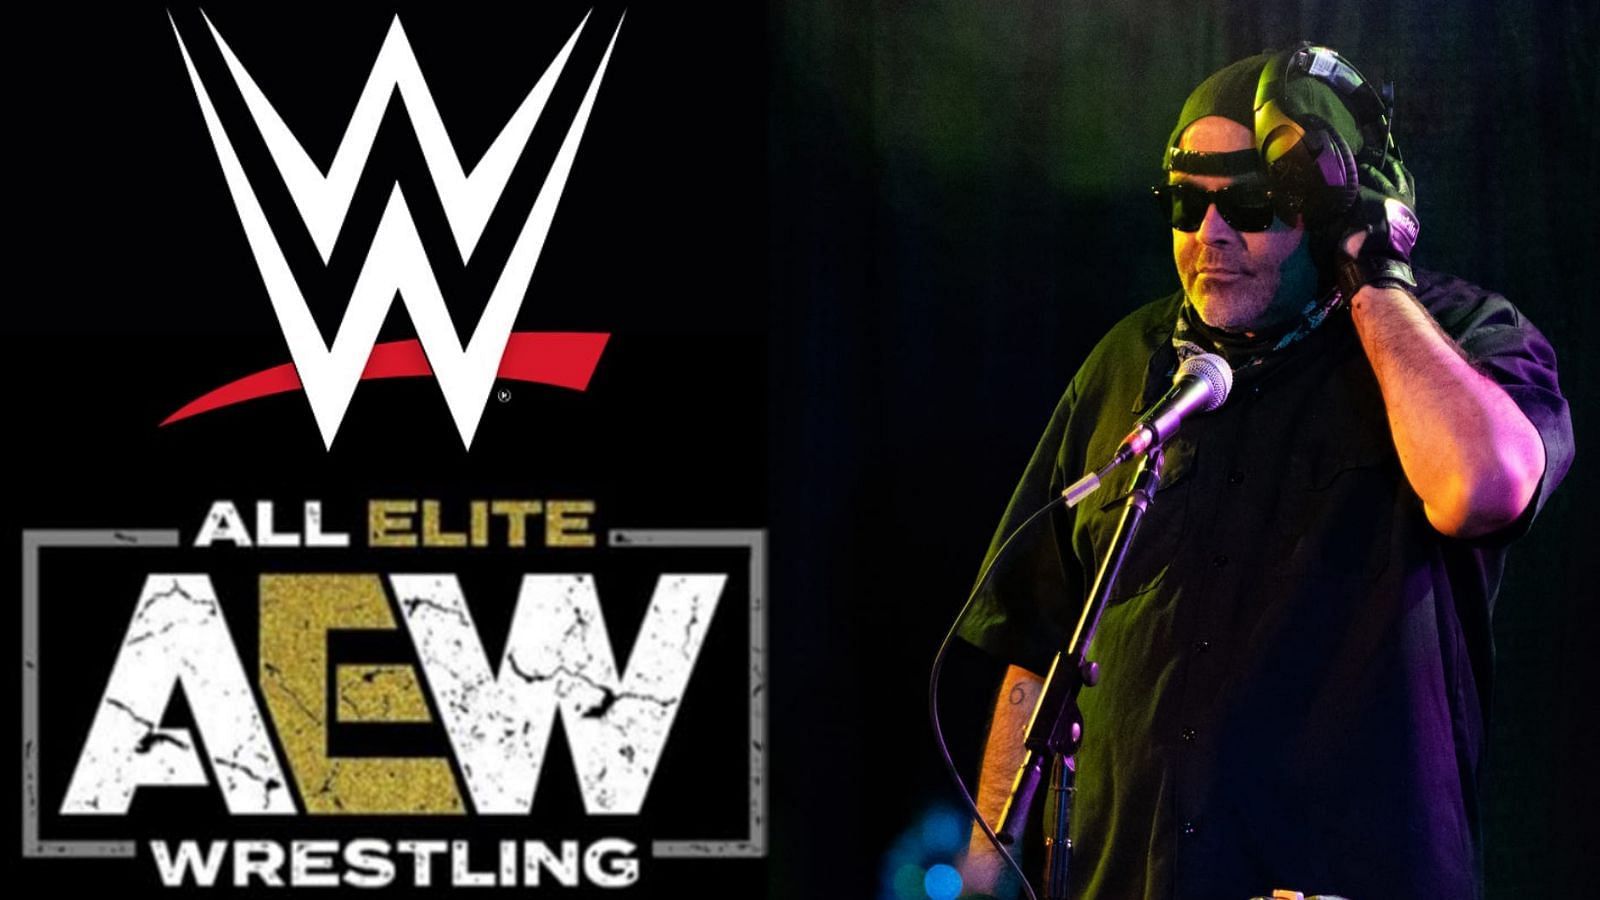 Konnan has made appearances on AEW in the past